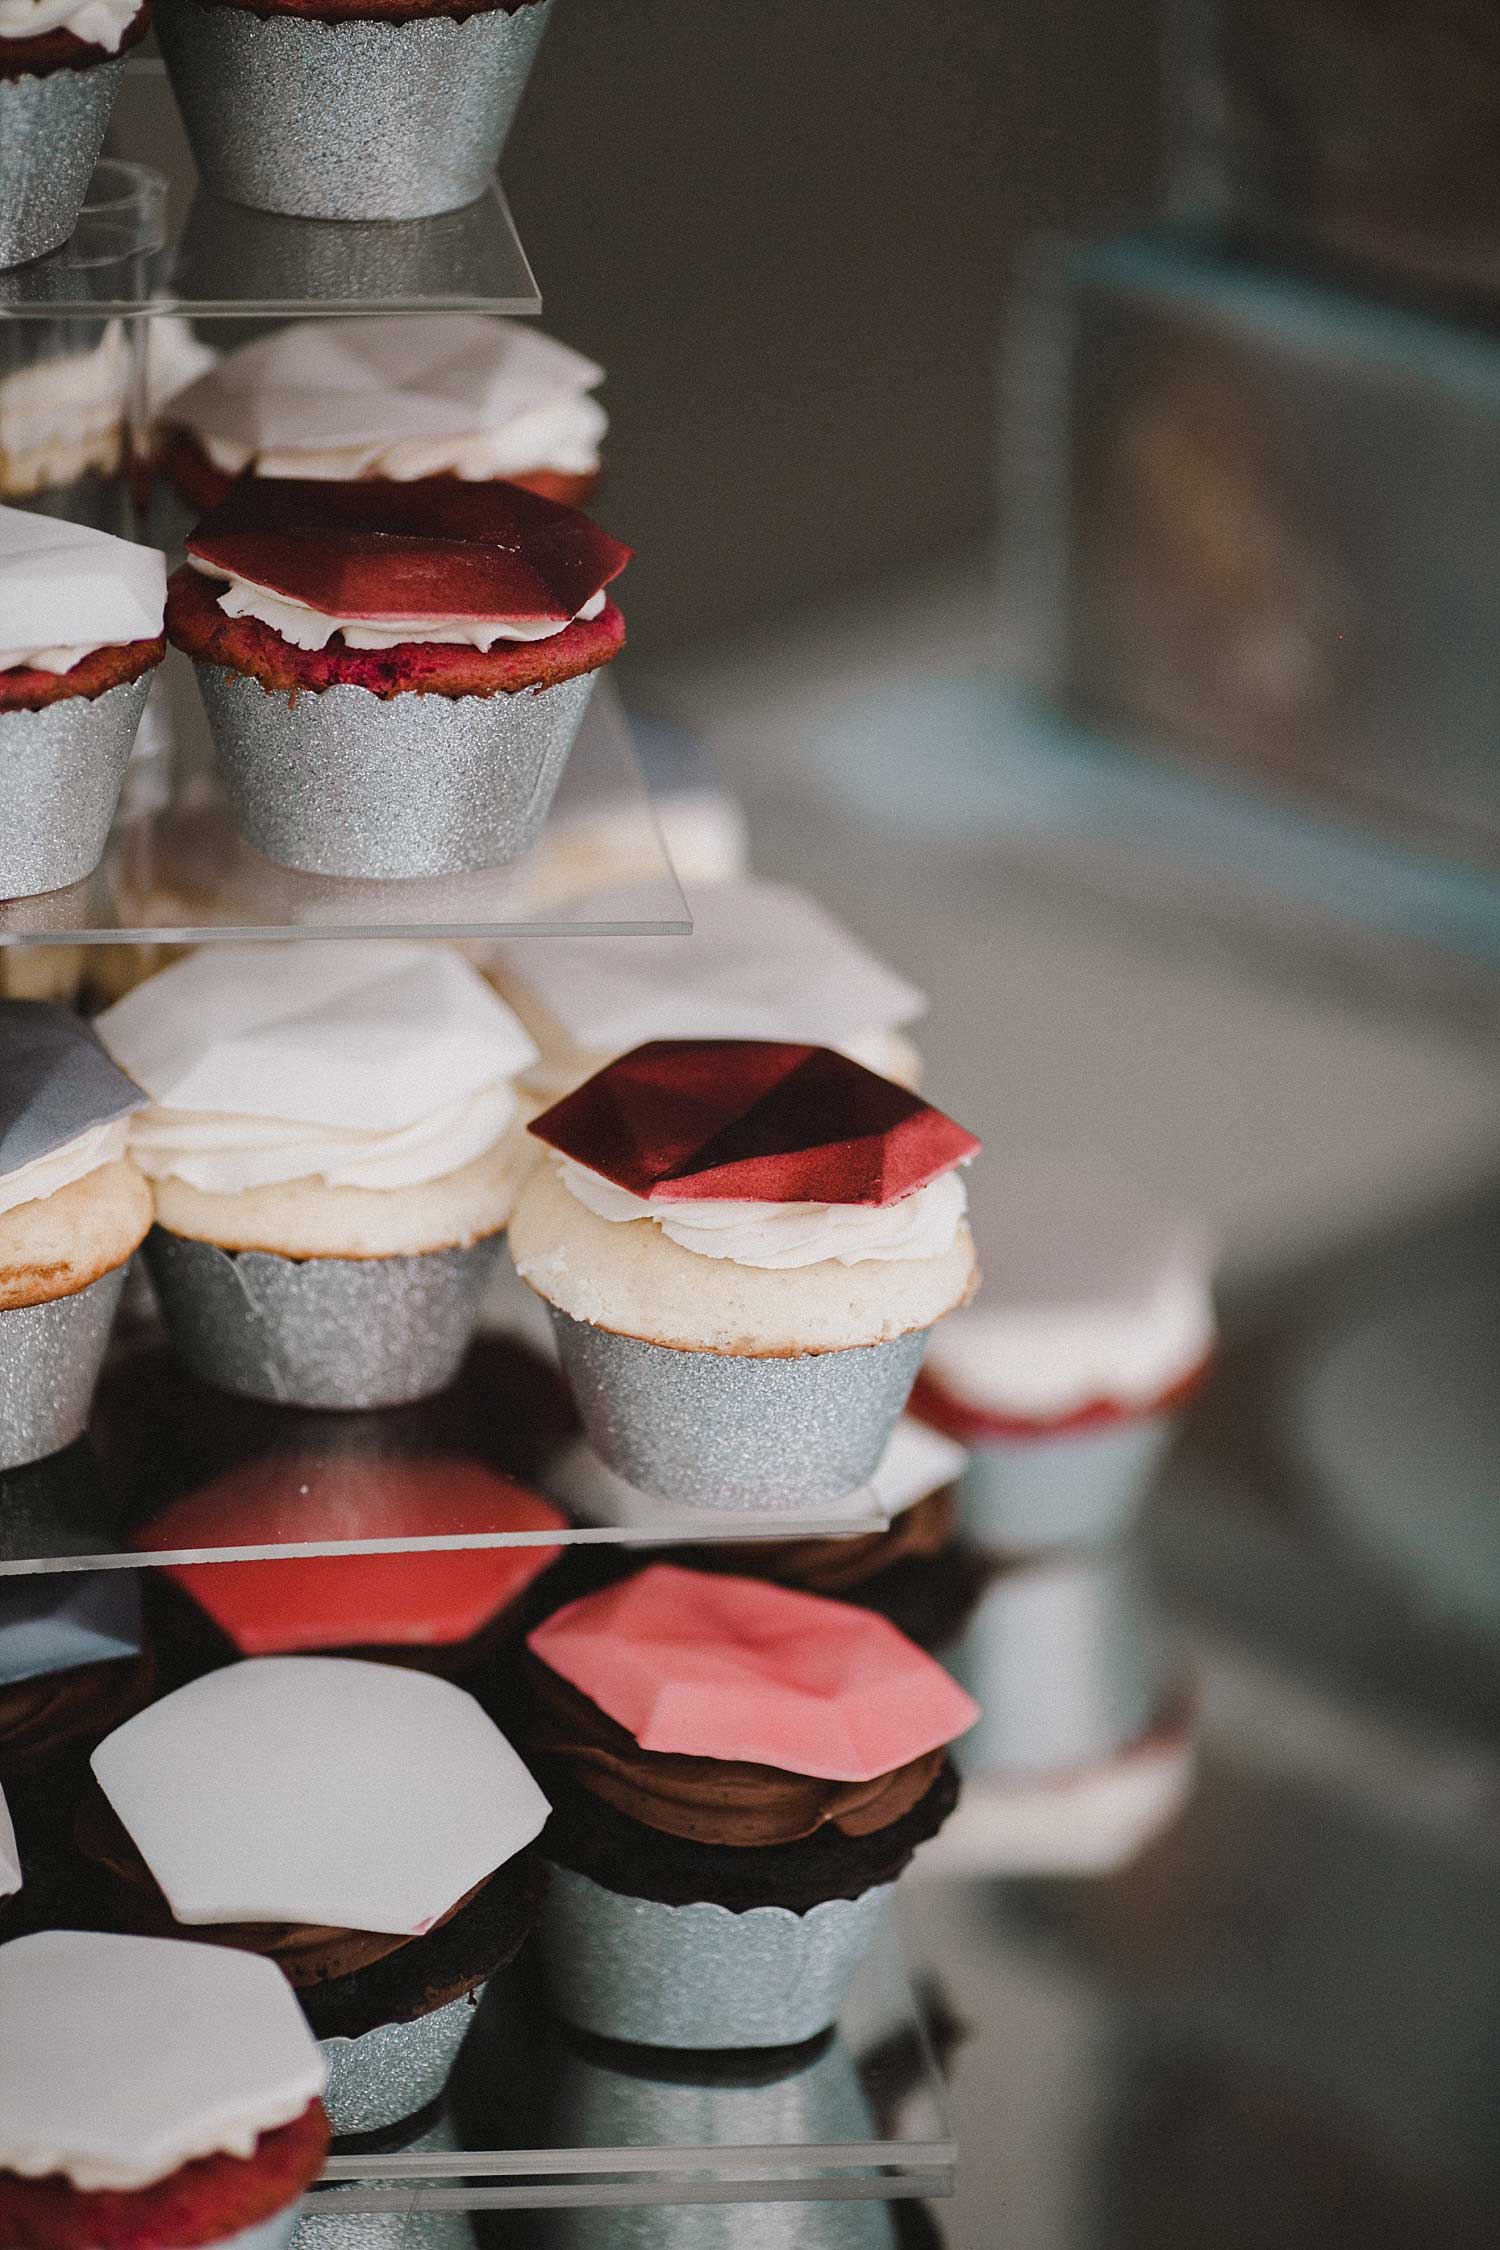 cupcakes with geometric shapes on top on a acrylic cake stand